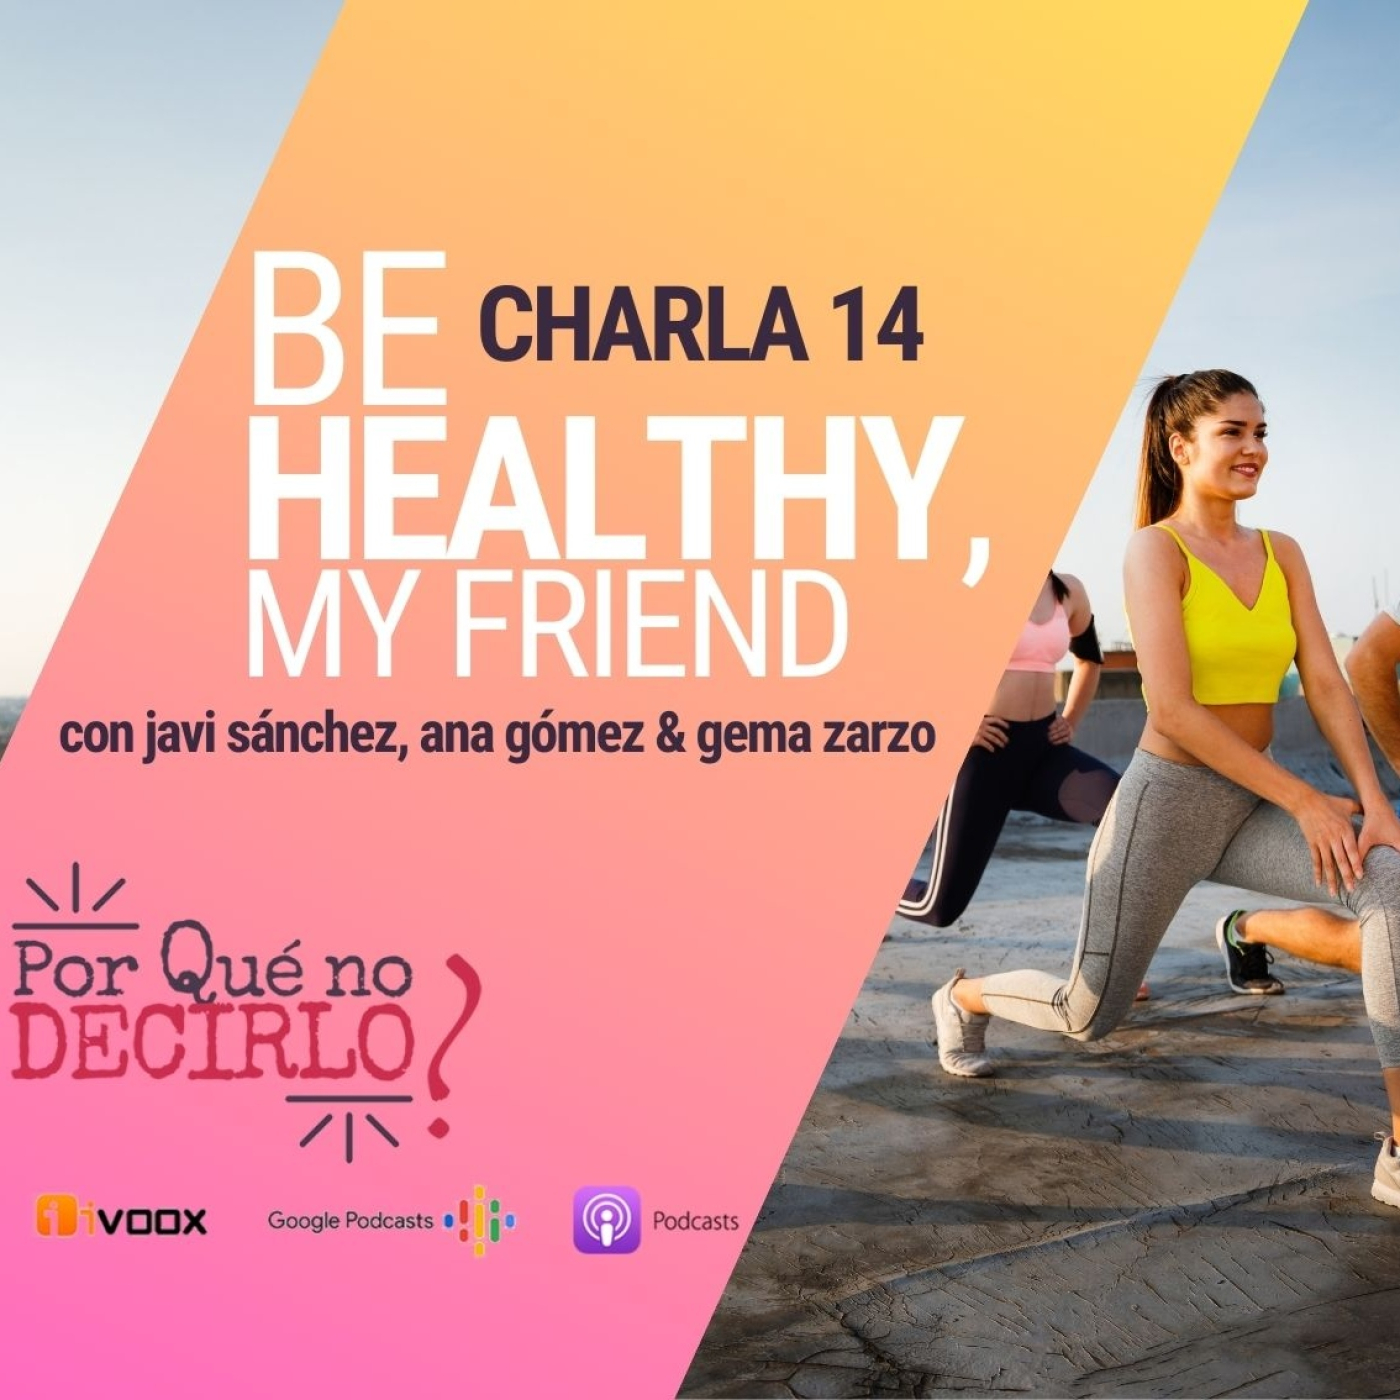 Charla 14   BE HEALTHY, my friend (parte 2)